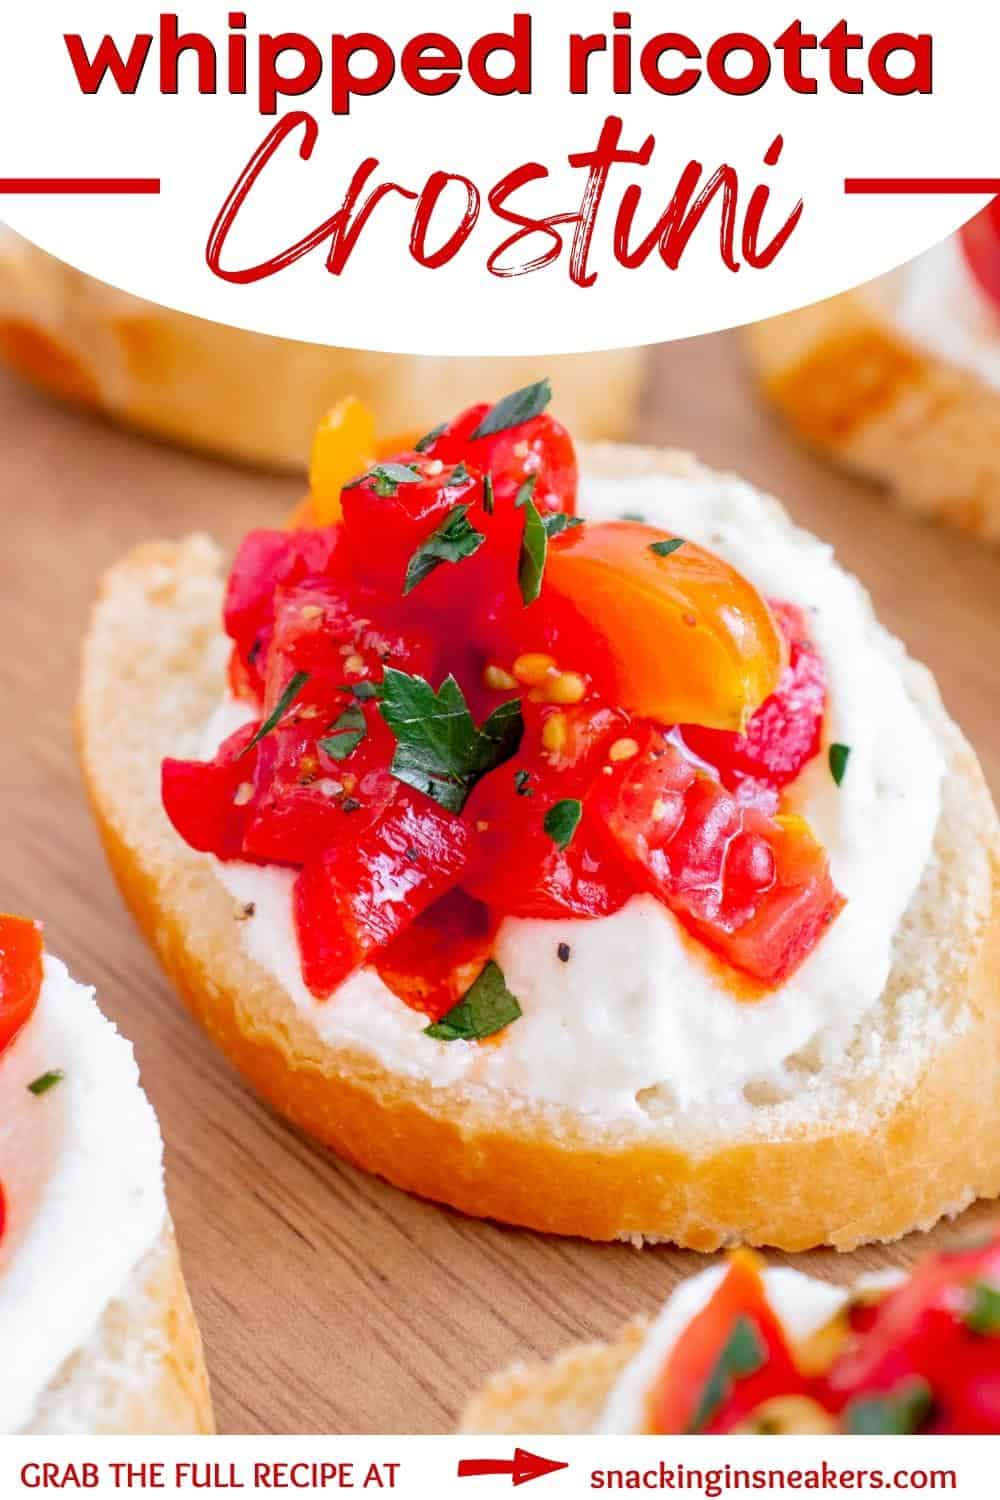 Whipped ricotta crostini topped with tomato and roasted red peppers.